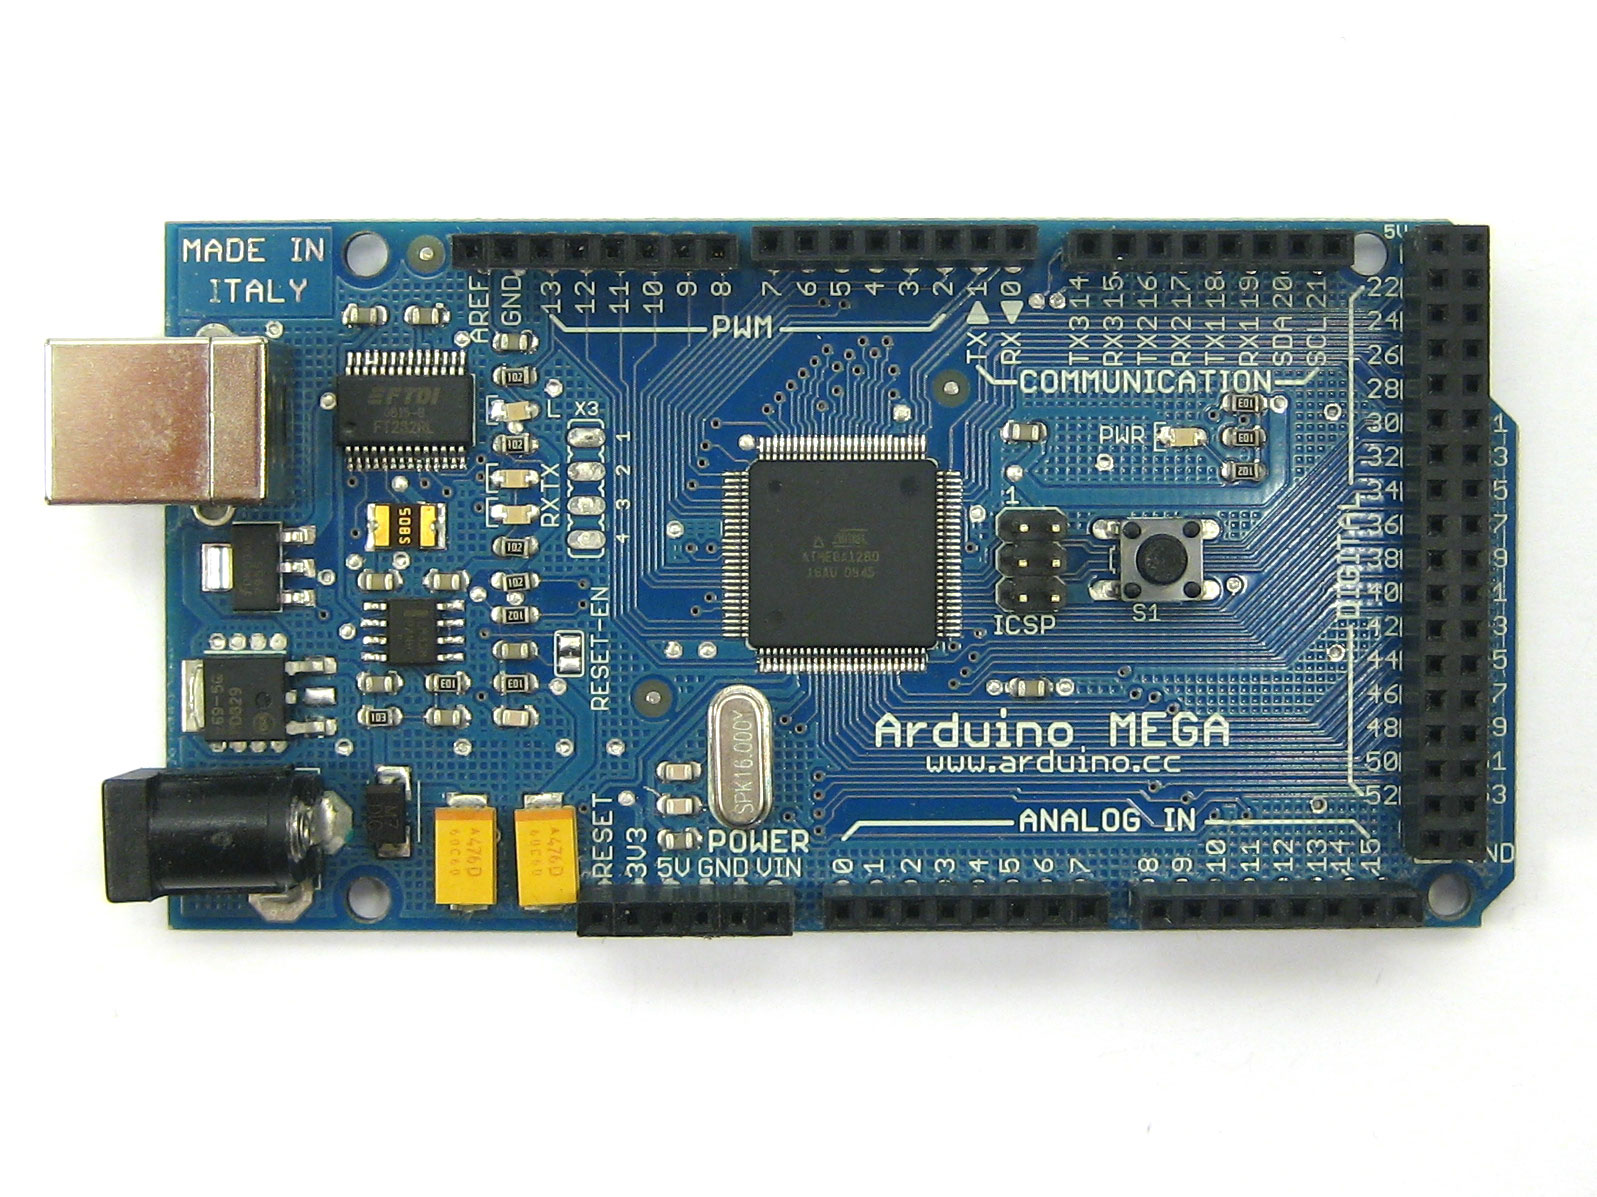 There are several Arduino boards on the market, and one of the most notable ones is the Arduino Leonardo Pinout. It features a built-in USB port that increases the microcontroller's functionality and connectivity. The Leonardo pinout is also slightly different from some of its siblings in the Arduino family. We have covered its pin layout in detail below, so read through it before using the board in your project. What is Arduino Leonardo? Arduino Leonardo is a board microcontroller based on the low-power, high-performance ATmega32u4 chip. It features 20 digital I/O pins (12 double up as analog inputs and seven as PWM outputs), a micro USB port, a 16 MHz crystal oscillator, a reset button, and an ICSP header. https://upload.wikimedia.org/wikipedia/commons/thumb/3/38/Arduino_Leonardo.jpg/1599px-Arduino_Leonardo.jpg?20110929073301 The Arduino Leonardo Source: Wikimedia Commons Arduino Leonardo Pinout The Arduino Leonardo's pinout broadly falls into the following nine categories. Pin Category Representation Description Power Pins 3.3V, 5V, GND (three ground pins), IOREF, AREF, Vin, RESET Supply power to the connected device Digital Pins 0-13 Provide Arduino digital inputs and outputs PWM Pins 3, 5, 6, 9, 10, 11, 13 Used to generate the pulsating signal Analog Pins Pins A0-A5 Provide analog inputs and outputs Header Pins (6) ICSP Used to program the controller UART Rx (0), Tx (1) Used for serial communication I2C/ TWI interface SCL, SDA SCL (Serial Clock) transmits clock data for synchronization, while SDA (Serial Data) sends and receives data External Interrupts 0 (interrupt 2) 1 (interrupt 3) 2 (interrupt 1) 3 (interrupt 0) 7 (interrupt 4) Configurable to trigger interrupts on a rising/falling edge, level/value change, or low value SPI (Serial Peripheral Interface) Pins ICSP Used for efficient communication with one or more peripheral devices There's also a built-in LED connected to pin 13. If set to one (high), this LED turns on. If low (0), it turns off. Arduino Leonardo Specifications Microcontroller ATmega32u4 Operating Voltage 5V Recommended Input Voltage 7 to 12V Input Voltage Limit 6 to 20V Digital Input/Output Pins 20 PWM Channels 7 Input Channels (Analog) 12 DC for 3.3V Pin 50 mA DC per Input/Output Pin 40 mA Flash Memory 32 KB (4KB reserved for the bootloader) SRAM 2.5 KB (ATmega32u4) EEPROM 1 KB (ATmega32u4) Clock Speed 16 MHz Dimensions 68.6 x 53.3mm Weight 20g Arduino Leonardo Schematic Arduino Leonardo is open-source hardware, so you can build the board using this schematic and pinout file. It is vital to note the following points. Power You can power the Leonardo using the micro USB connection or an external (non-USB) power supply. The external power source can either be a battery or an AC-DC adapter, and the board will select the power source automatically. USB Overcurrent Protection This microcontroller features a resettable polyfuse. Its function is to protect the built-in USB ports from shorts and overcurrent. The fuse provides an extra protection layer to the computer's internal protection mechanism, safeguarding the system from currents above 500mA. Memory The ATmega32u4 controller contains 1KB EEPROM that you can read/write using the EEPROM library. There's also 2.5KB SRAM and 32KB flash memory. Input/Output Leonardo has 20 digital pins for I/O. Each operates at 5V and can provide or handle 40mA max. Additionally, every pin has a 20-50 kΩ internal pull-up resistor (disconnected by default). https://upload.wikimedia.org/wikipedia/commons/thumb/3/3d/Arduino_Leonardo_board_%28cropped%29.JPG/1540px-Arduino_Leonardo_board_%28cropped%29.JPG?20150803170232 The Arduino Leonardo with the power jack and ICSP header attached. Note the pin numbers/labels Source: Wikimedia Commons Physical Characteristics The max dimensions of the Leonardo are 68.6 x 53.3mm (2.7 x 2.1 inches). However, the power jack and USB connector extend beyond these dimensions. The space between pins 7 and 8 is 160 mil, and the board should have four screw holes for attaching to a case or surface. Communication This board has multiple communication facilities for interacting with other Arduino boards, computers, or microcontrollers. For instance, it provides UART, digital pin, and USB serial communication, a serial monitor in the Arduino software, I2C, and SPI communication. The microcontroller appears as a generic keyboard and mouse, and you can program it using the mouse and keyboard classes to control these input devices. https://upload.wikimedia.org/wikipedia/commons/thumb/0/0a/CleLeornado.png/1600px-CleLeornado.png?20140707143316 A modified Arduino Leonardo schematic for a USB keylogger Source: Wikimedia Commons Programming You can program this board using the Arduino software, but you must select Arduino Leonardo in the Tools > Board menu. However, you can bypass the built-in bootloader by using Leonardo's 6-pin ICSP header to program the board directly using the Arduino ISP. Auto Reset (Software) and Bootloader Initiation Instead of requiring a physical reset button address before uploading, Leonardo allows resetting by software running on a connected computer. Opening the CDC (virtual) serial/COM port at 1200 baud rate, then closing it triggers the reset. But you can also initiate the bootloader by pressing the onboard reset button. Connection and Firmware of the Arduino Leonardo Use the following steps to install the Leonardo driver. Connect the device to the PC Wait for the software installation wizard to launch (select Arduino Leonardo line and press update under the hardware section if it fails to launch) Search for drivers on the PC and click next Select the required driver in the software folder Accept installation If you want to flash the controller, press the upload button to load the software to the device's memory automatically. This step initiates the reset process, which leads to bootloader startup. After the reset, the platform will wait for a new serial port, then send the sketch to the new virtual COM port. However, the auto-reset might not activate, and you should do the following if it fails. Press and hold the reset button until uploading begins Control the bootloader startup (should see a new port) https://upload.wikimedia.org/wikipedia/commons/thumb/2/21/Arduino_Leonardo_PCB.jpg/1600px-Arduino_Leonardo_PCB.jpg?20111004100110 The Leonardo board. Note the reset button on the upper left corner Source: Wikimedia Commons Comparison with Arduino UNO, NANO, MEGA Compared to its predecessors (Arduino NANO, UNO, and MEGA), Leonardo runs on a single chip, the ATmega32u4 microchip. This chip gives Leonardo more functionality than the other three. https://upload.wikimedia.org/wikipedia/commons/thumb/3/3a/Arduino_UNO_unpacked.jpg/1599px-Arduino_UNO_unpacked.jpg?20120109151834 The Arduino UNO rev 2 Source: Wikimedia Commons Additionally, using a single chip makes the serial ports virtual. Real serial ports require a dedicated chip for serial communication. https://upload.wikimedia.org/wikipedia/commons/thumb/1/11/Arduino_Nano_on_table.jpg/1052px-Arduino_Nano_on_table.jpg?20210411085003 The Arduino NANO Source: Wikimedia Commons Other Differences A computer can detect the microcontroller as a keyboard, mouse, HID device, or serial port Opening a serial port on the PC does not trigger automatic restarting More PWM inputs and RAM Increased connectivity and functionality from the micro USB connection https://upload.wikimedia.org/wikipedia/commons/0/01/Arduino_Mega.jpg?20110709214008 The Arduino MEGA Source: Wikimedia Commons Arduino Leonardo Applications Industrial automation Wireless keyboards USB trackpad Embedded systems Security and health systems Automatic pill dispenser Summary In conclusion, the Arduino Leonardo's built-in USB communication is its most unique feature compared to its predecessors. Since the USB port is somehow part of the pinout, it is vital to consider it and the other pins altogether. We hope this article has been insightful and if you have any questions or need the Leonardo, contact us for more details.